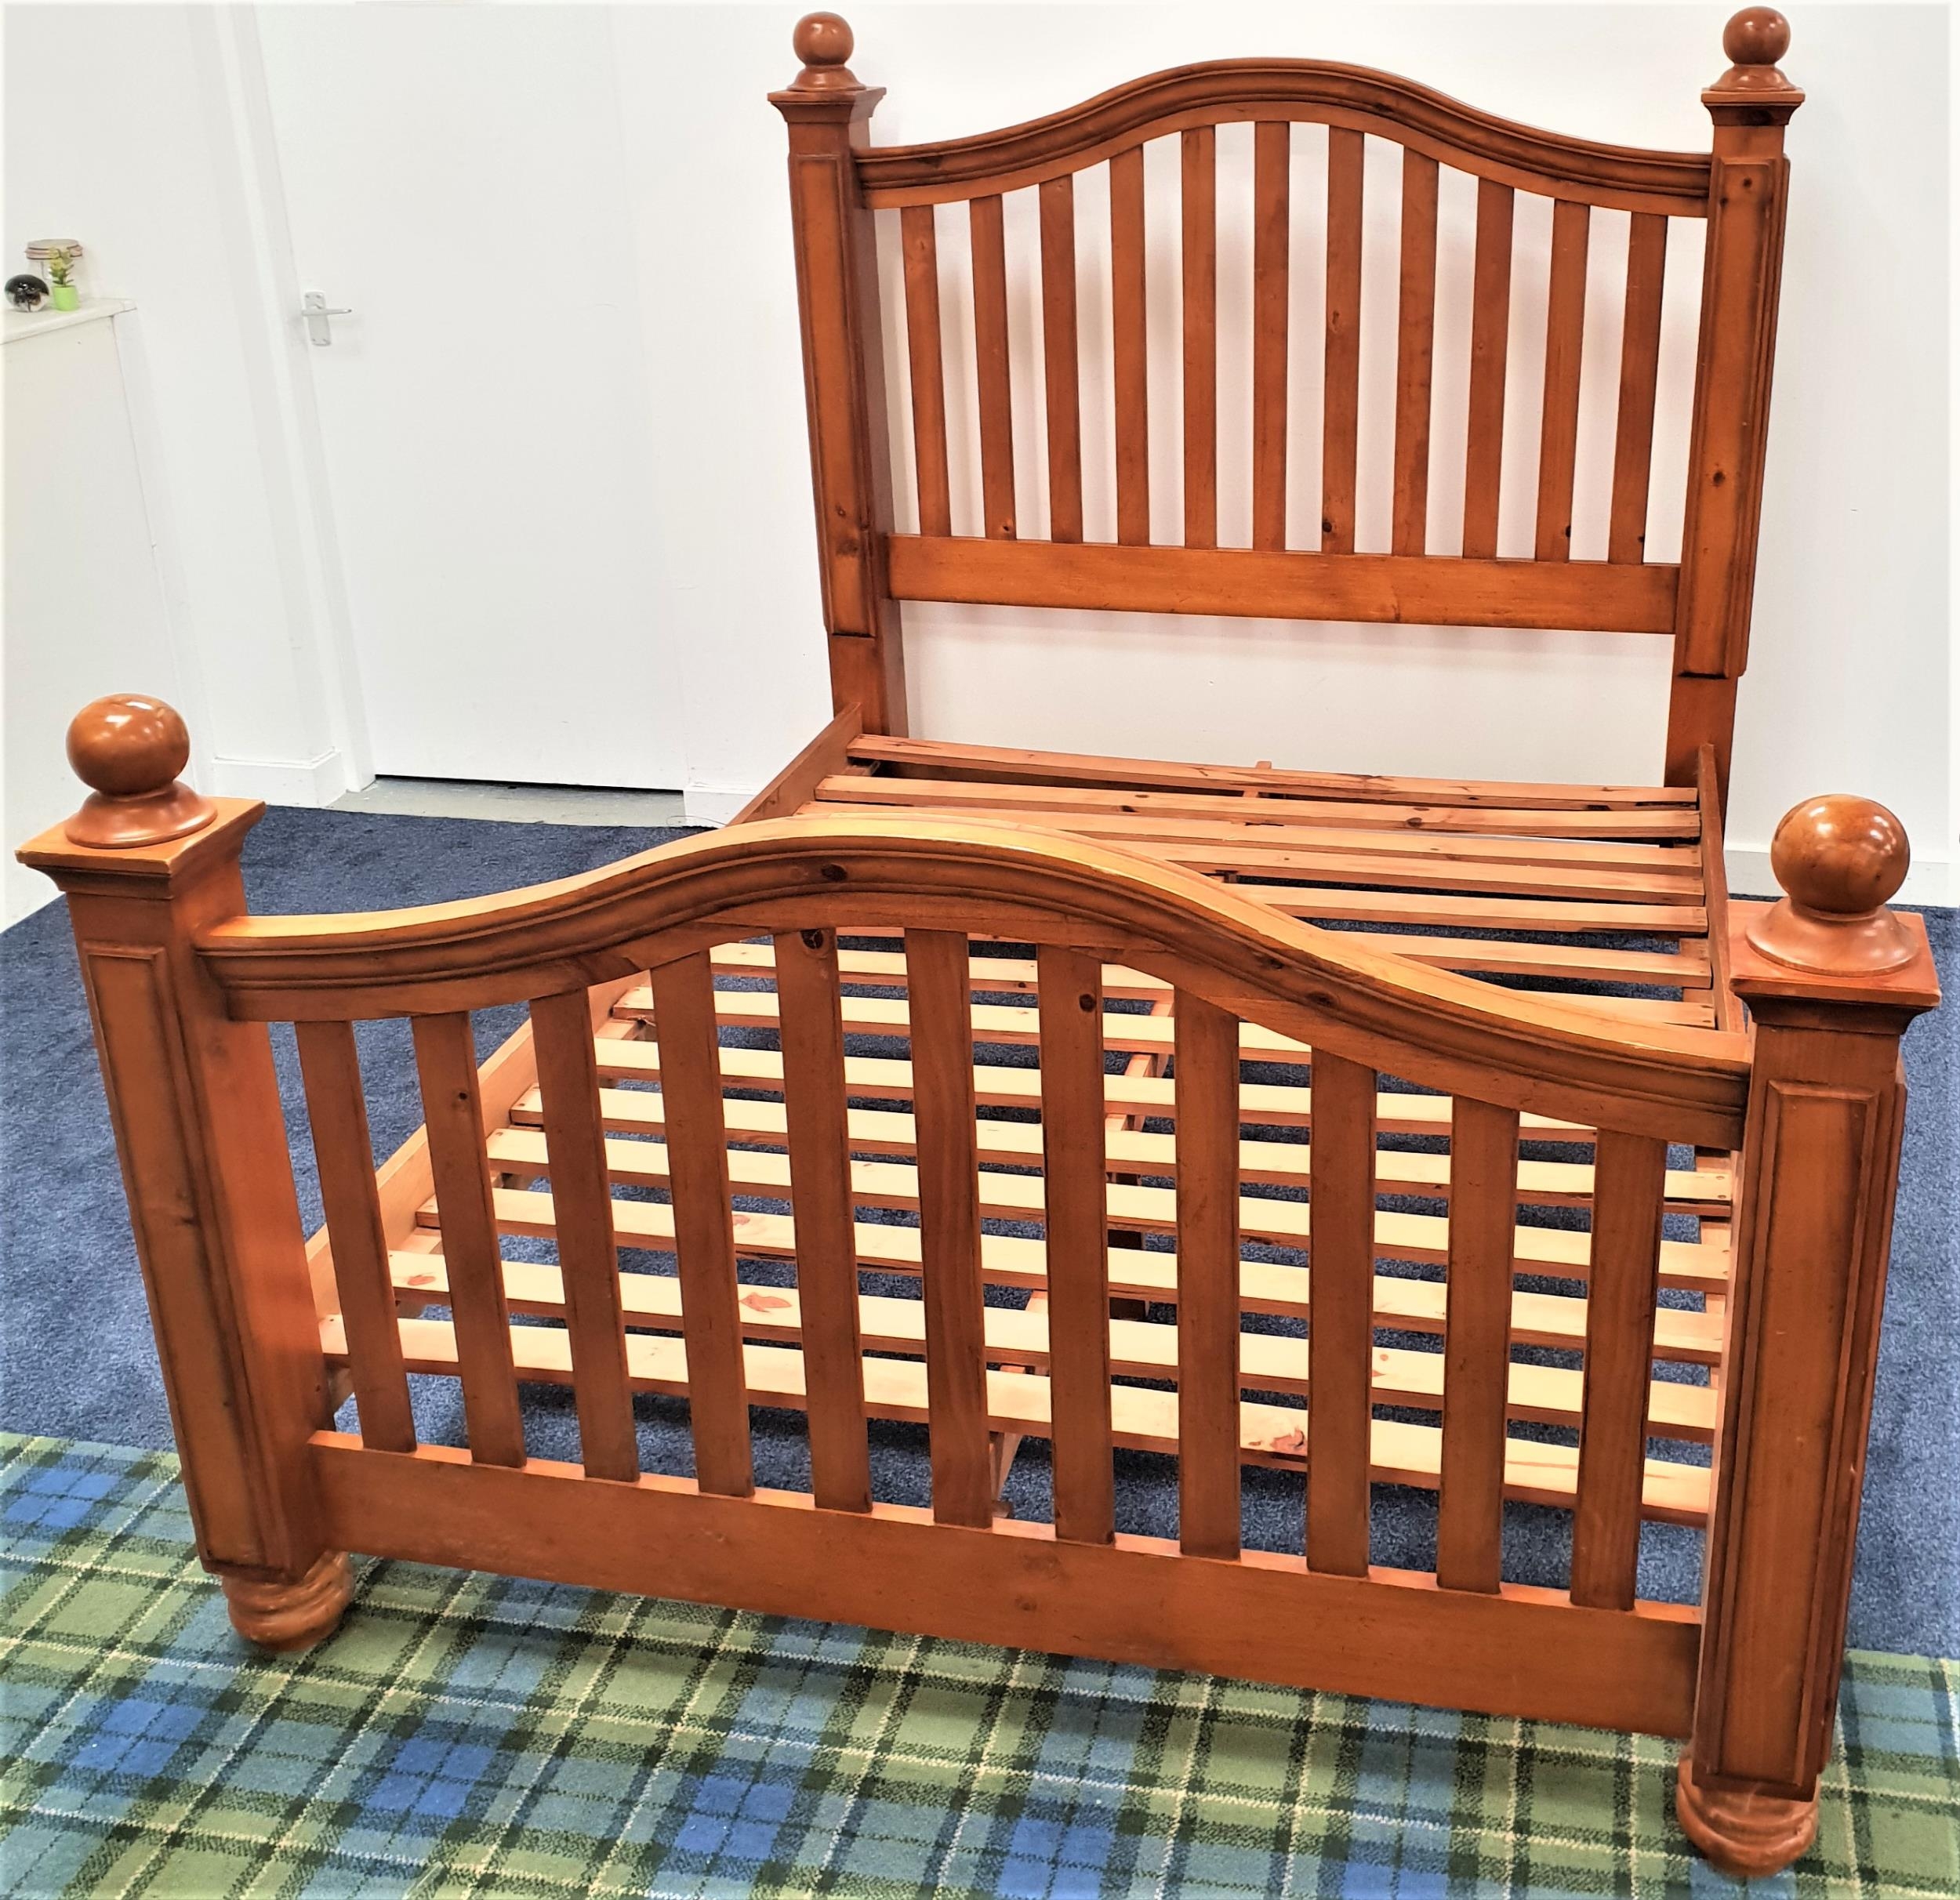 VIETNAMESE TEAK KING SIZE BED with an arched slatted head and footboard, plank sides and a slatted